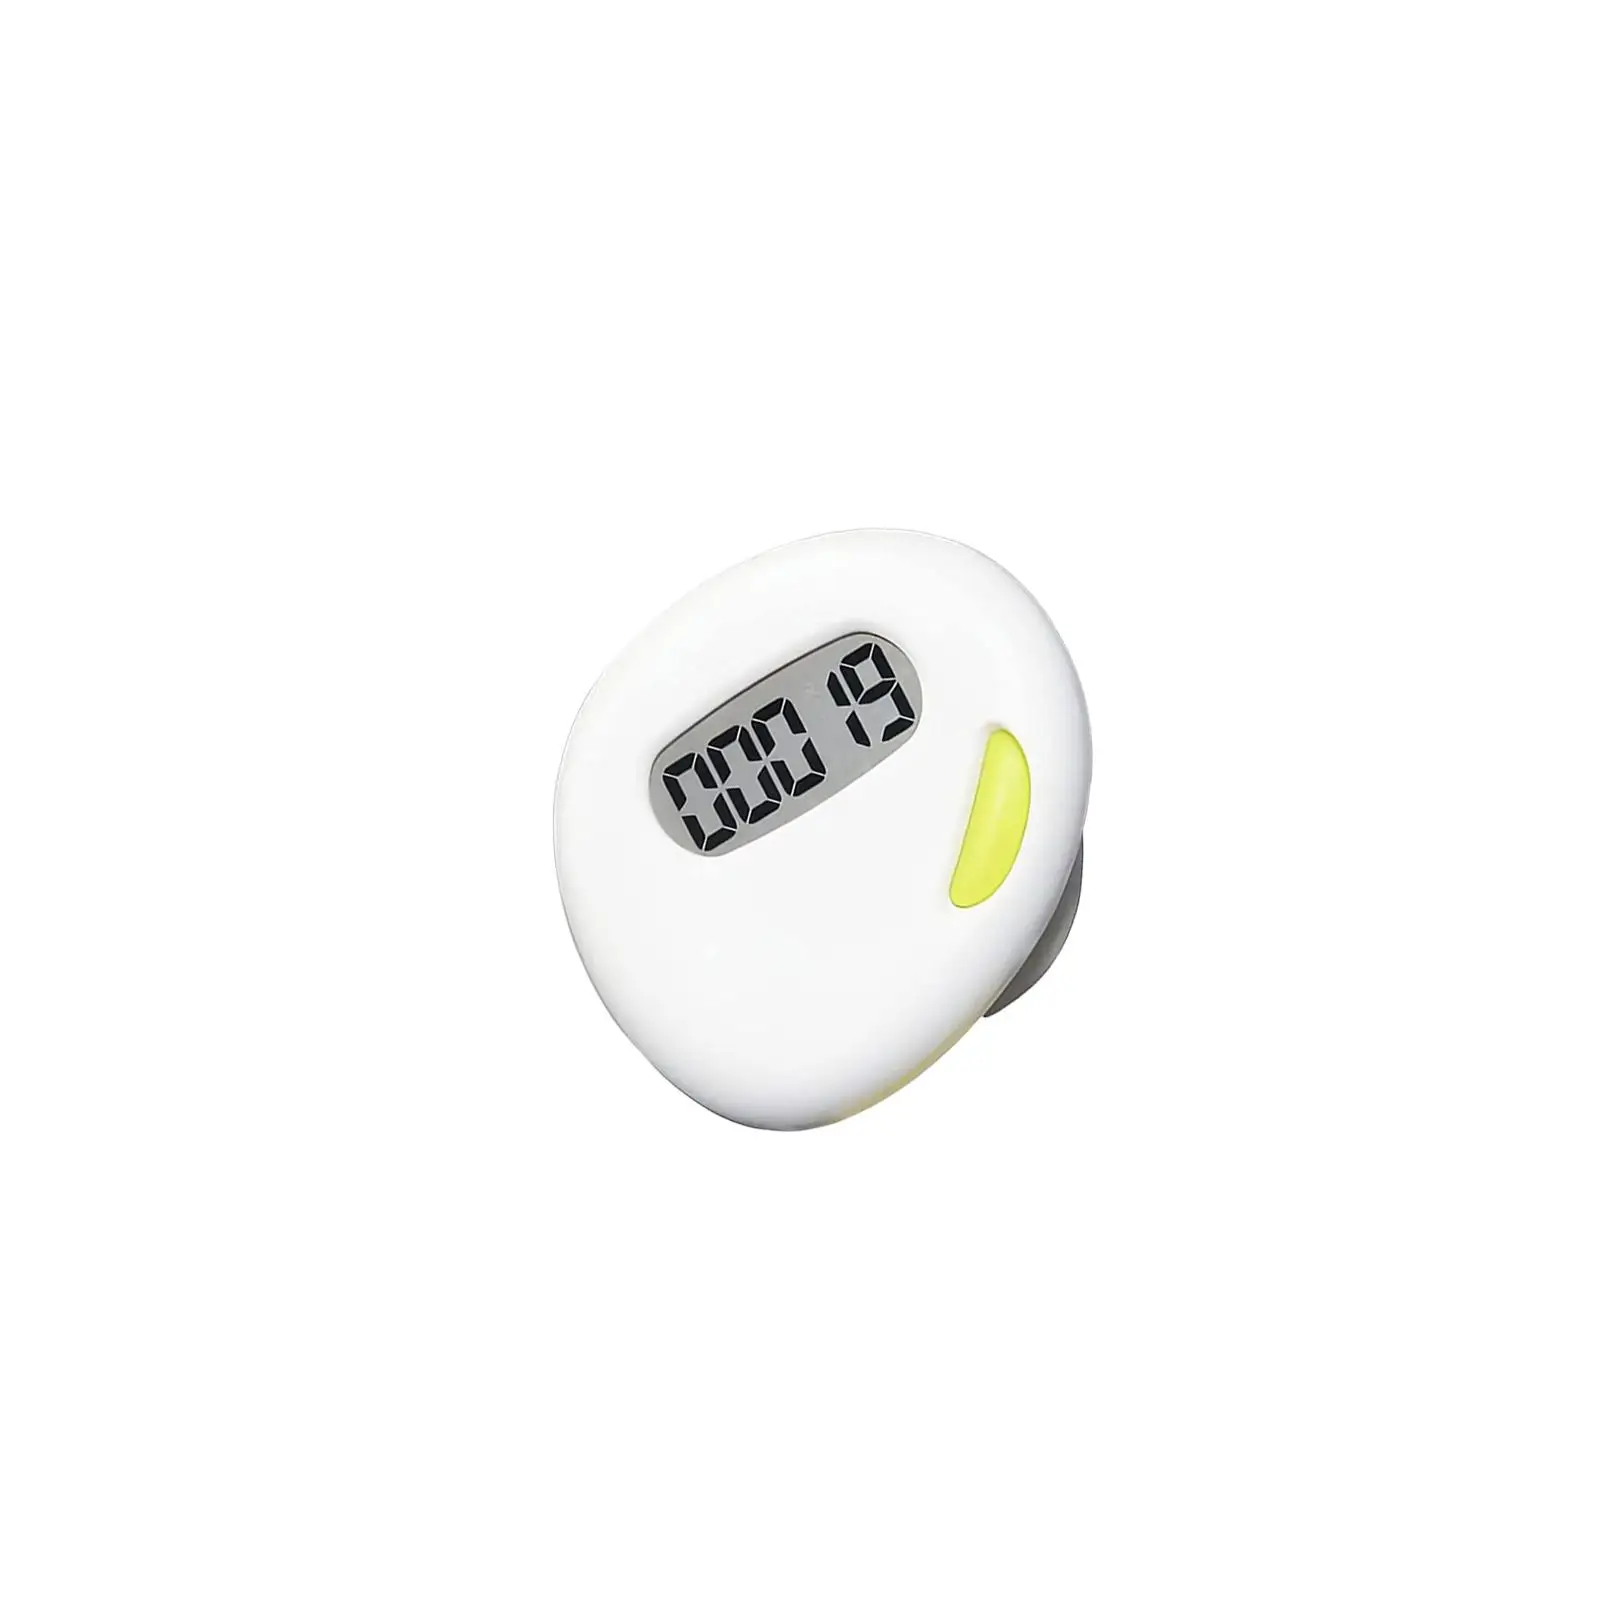 2D Pedometer Electronic Pedometer Distance Calorie Counter Walk Motion Step